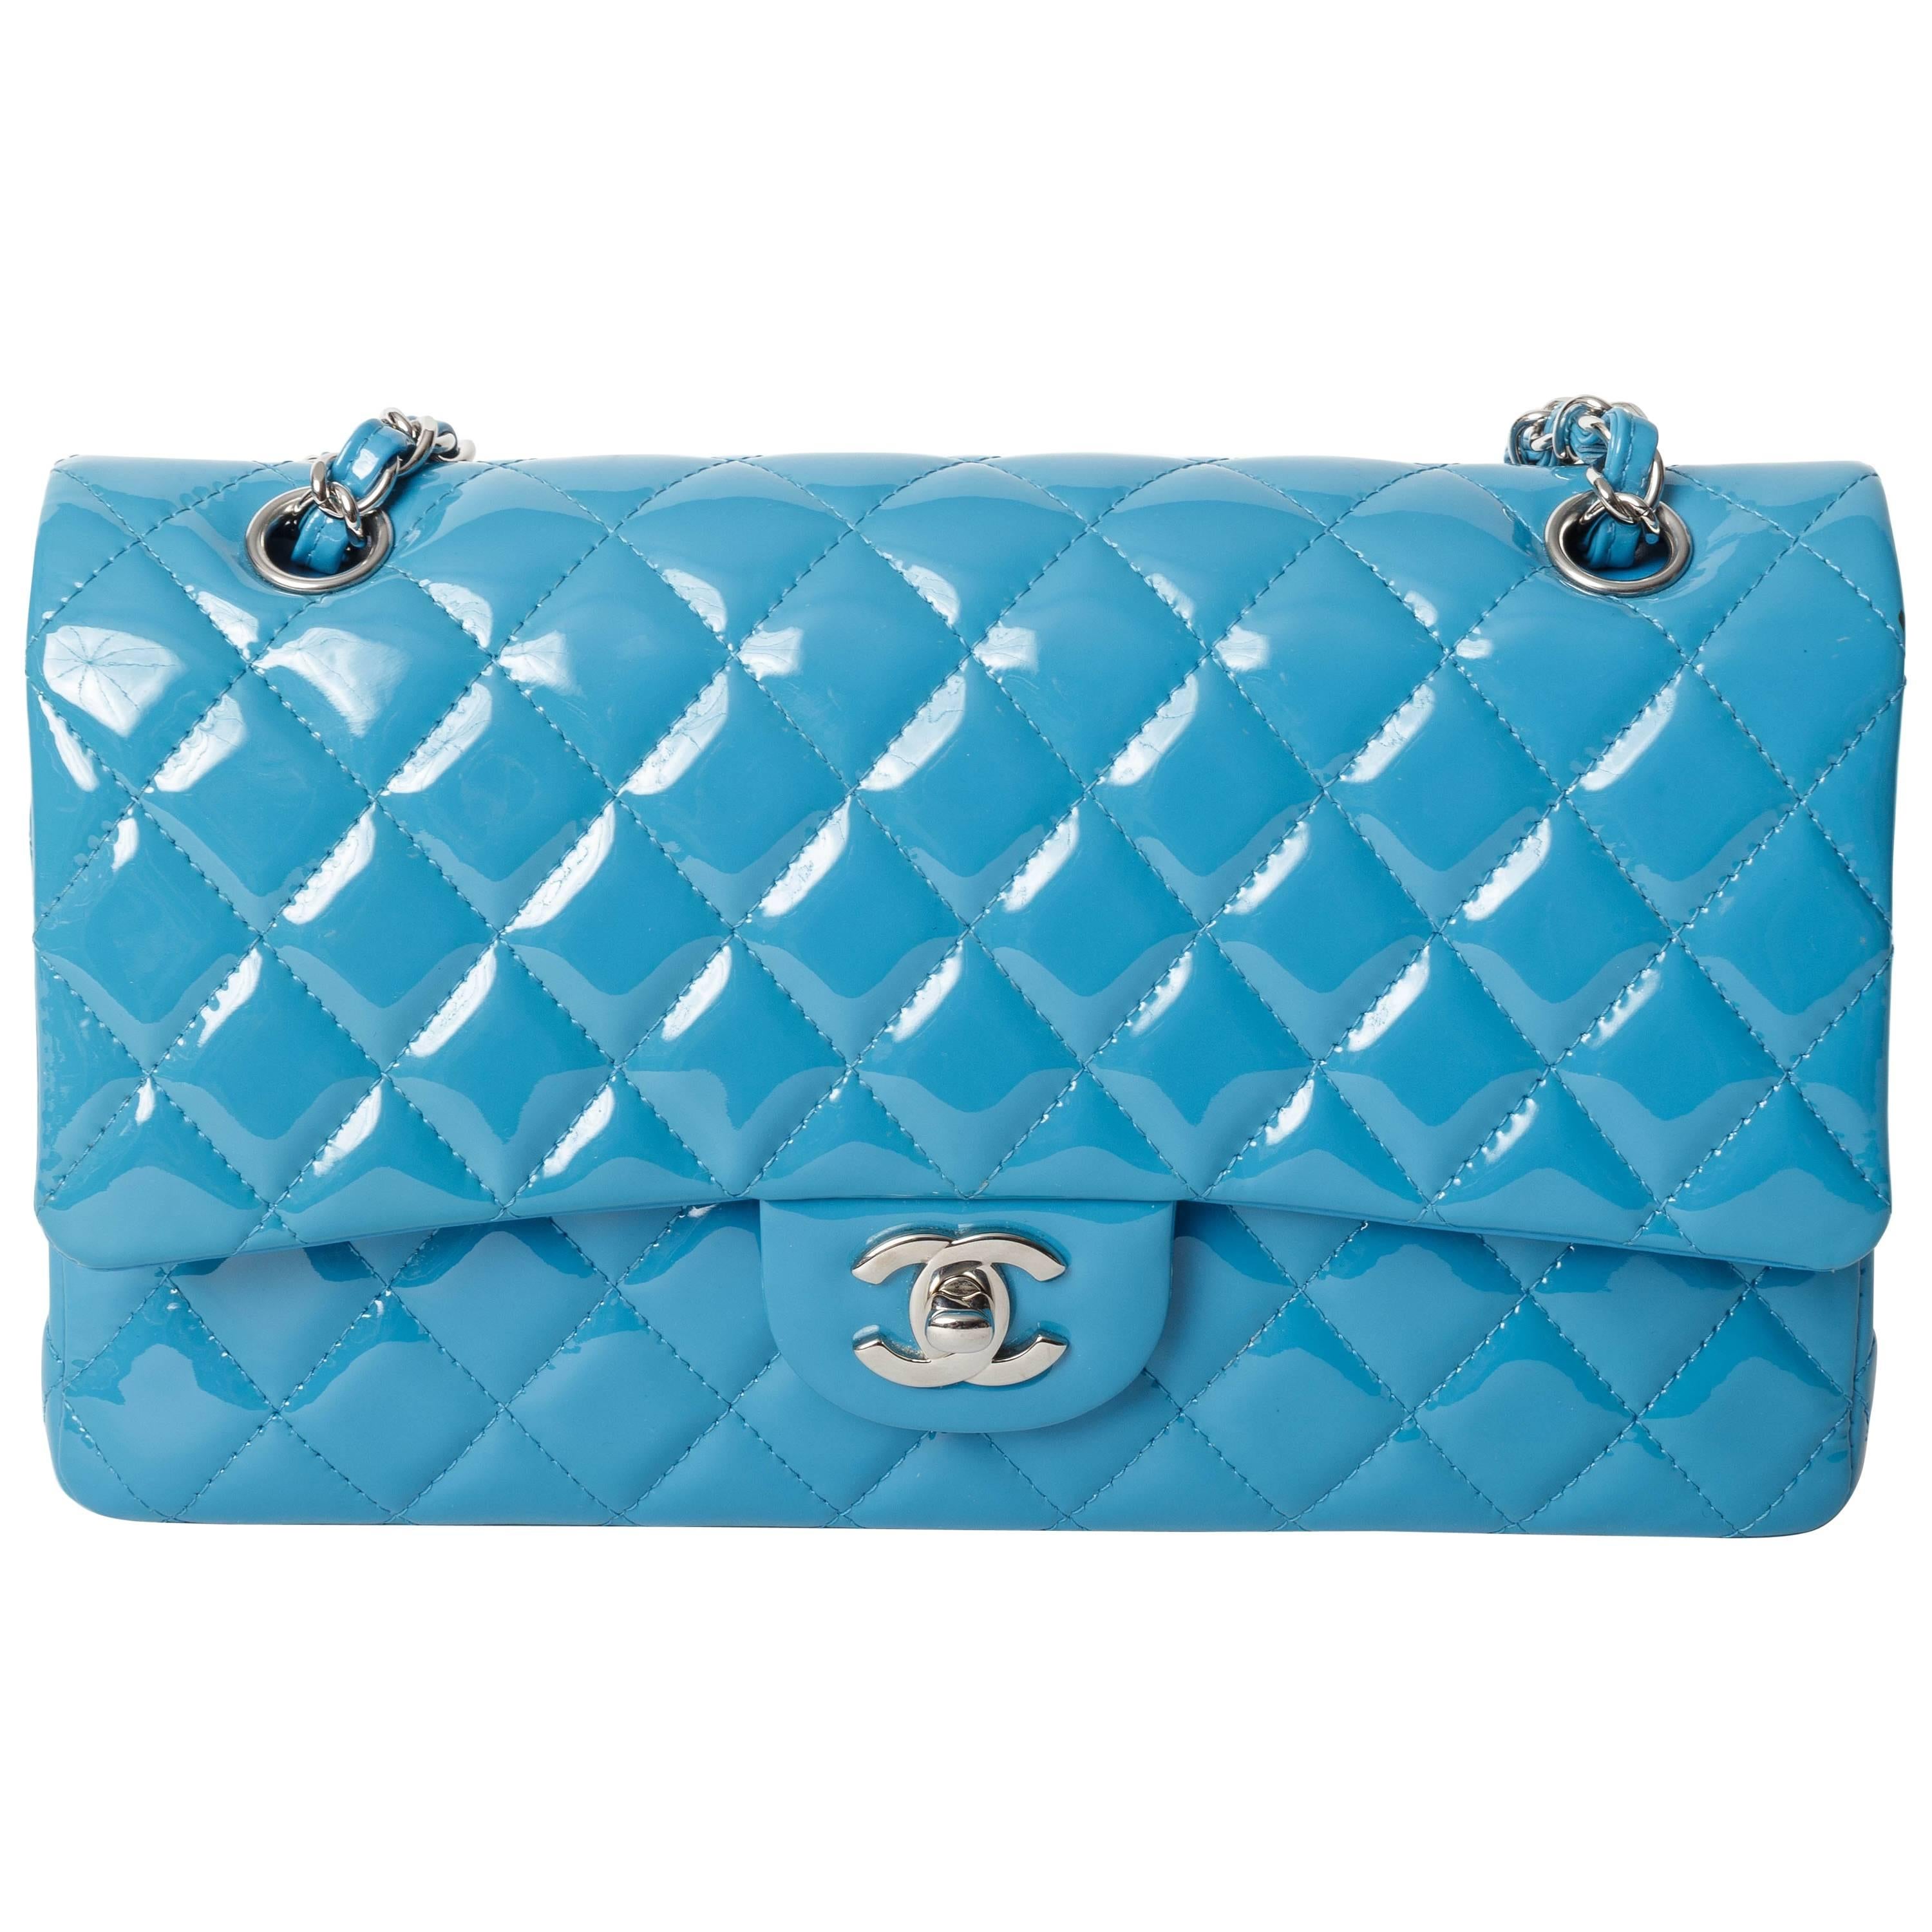 Chanel Teal Patent Medium Classic Double Flap Bag with Silver Hardware